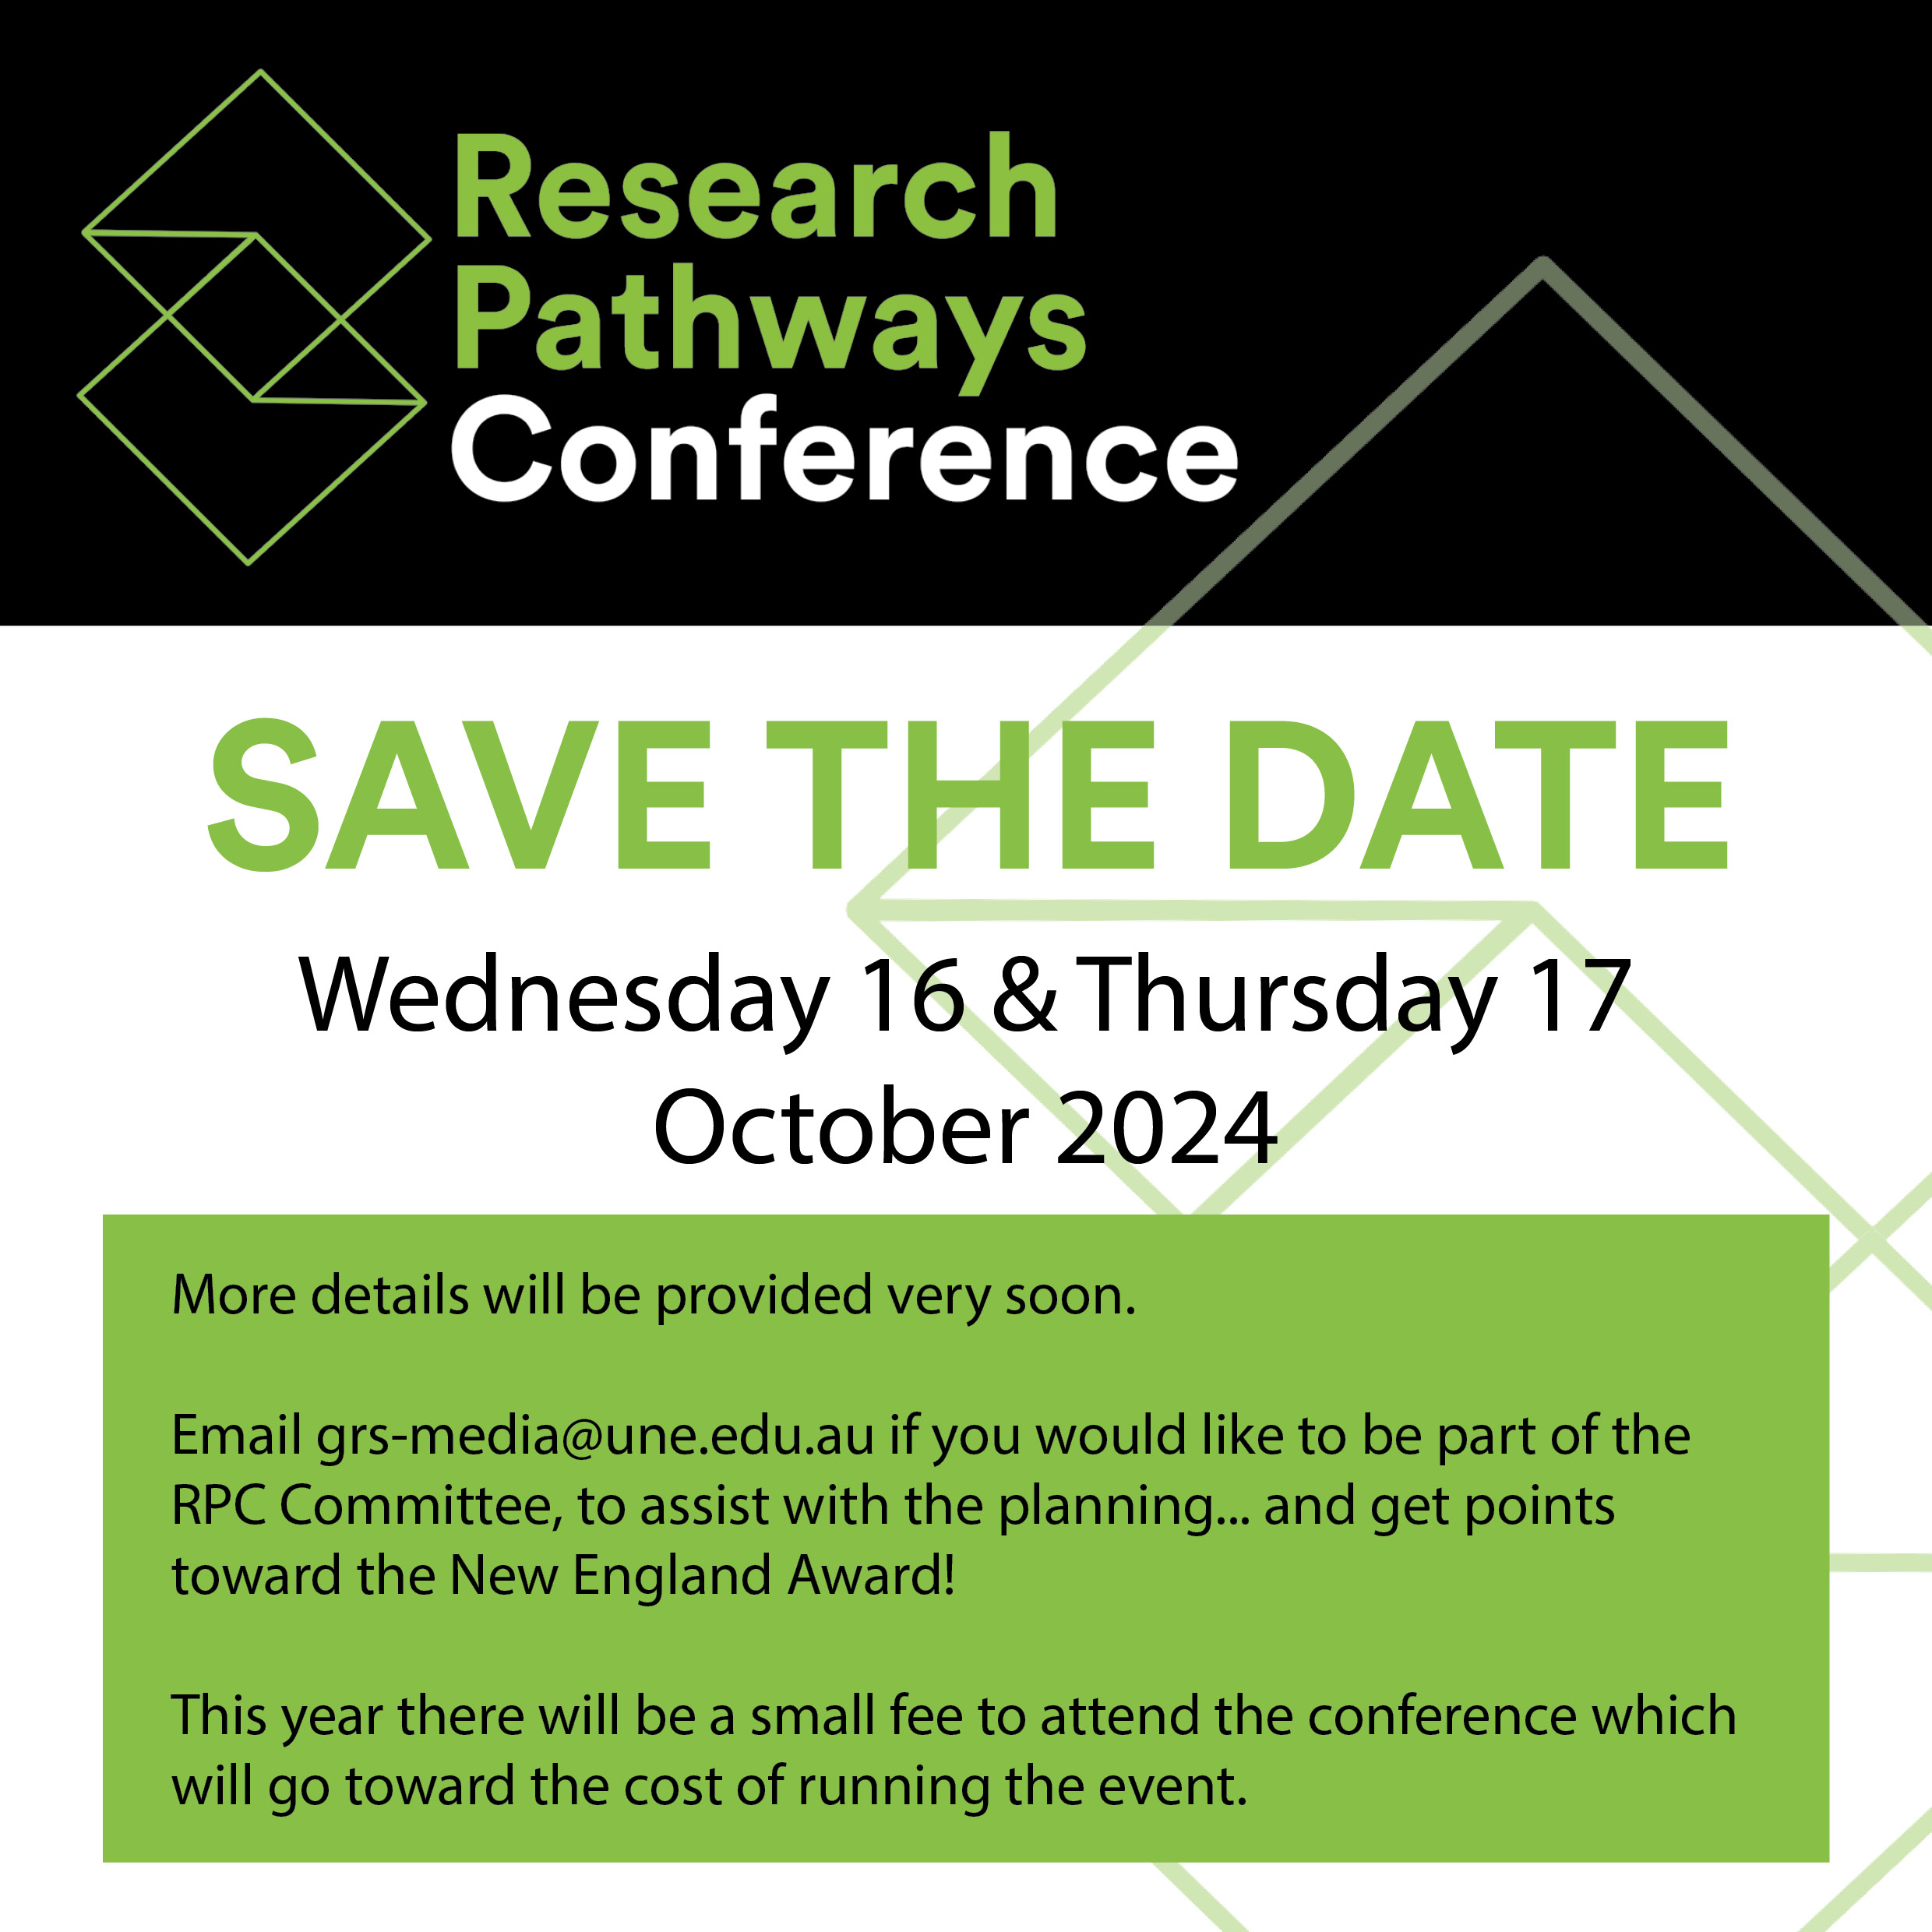 Save the Date Image with information about 2024 Research Pathways Conference